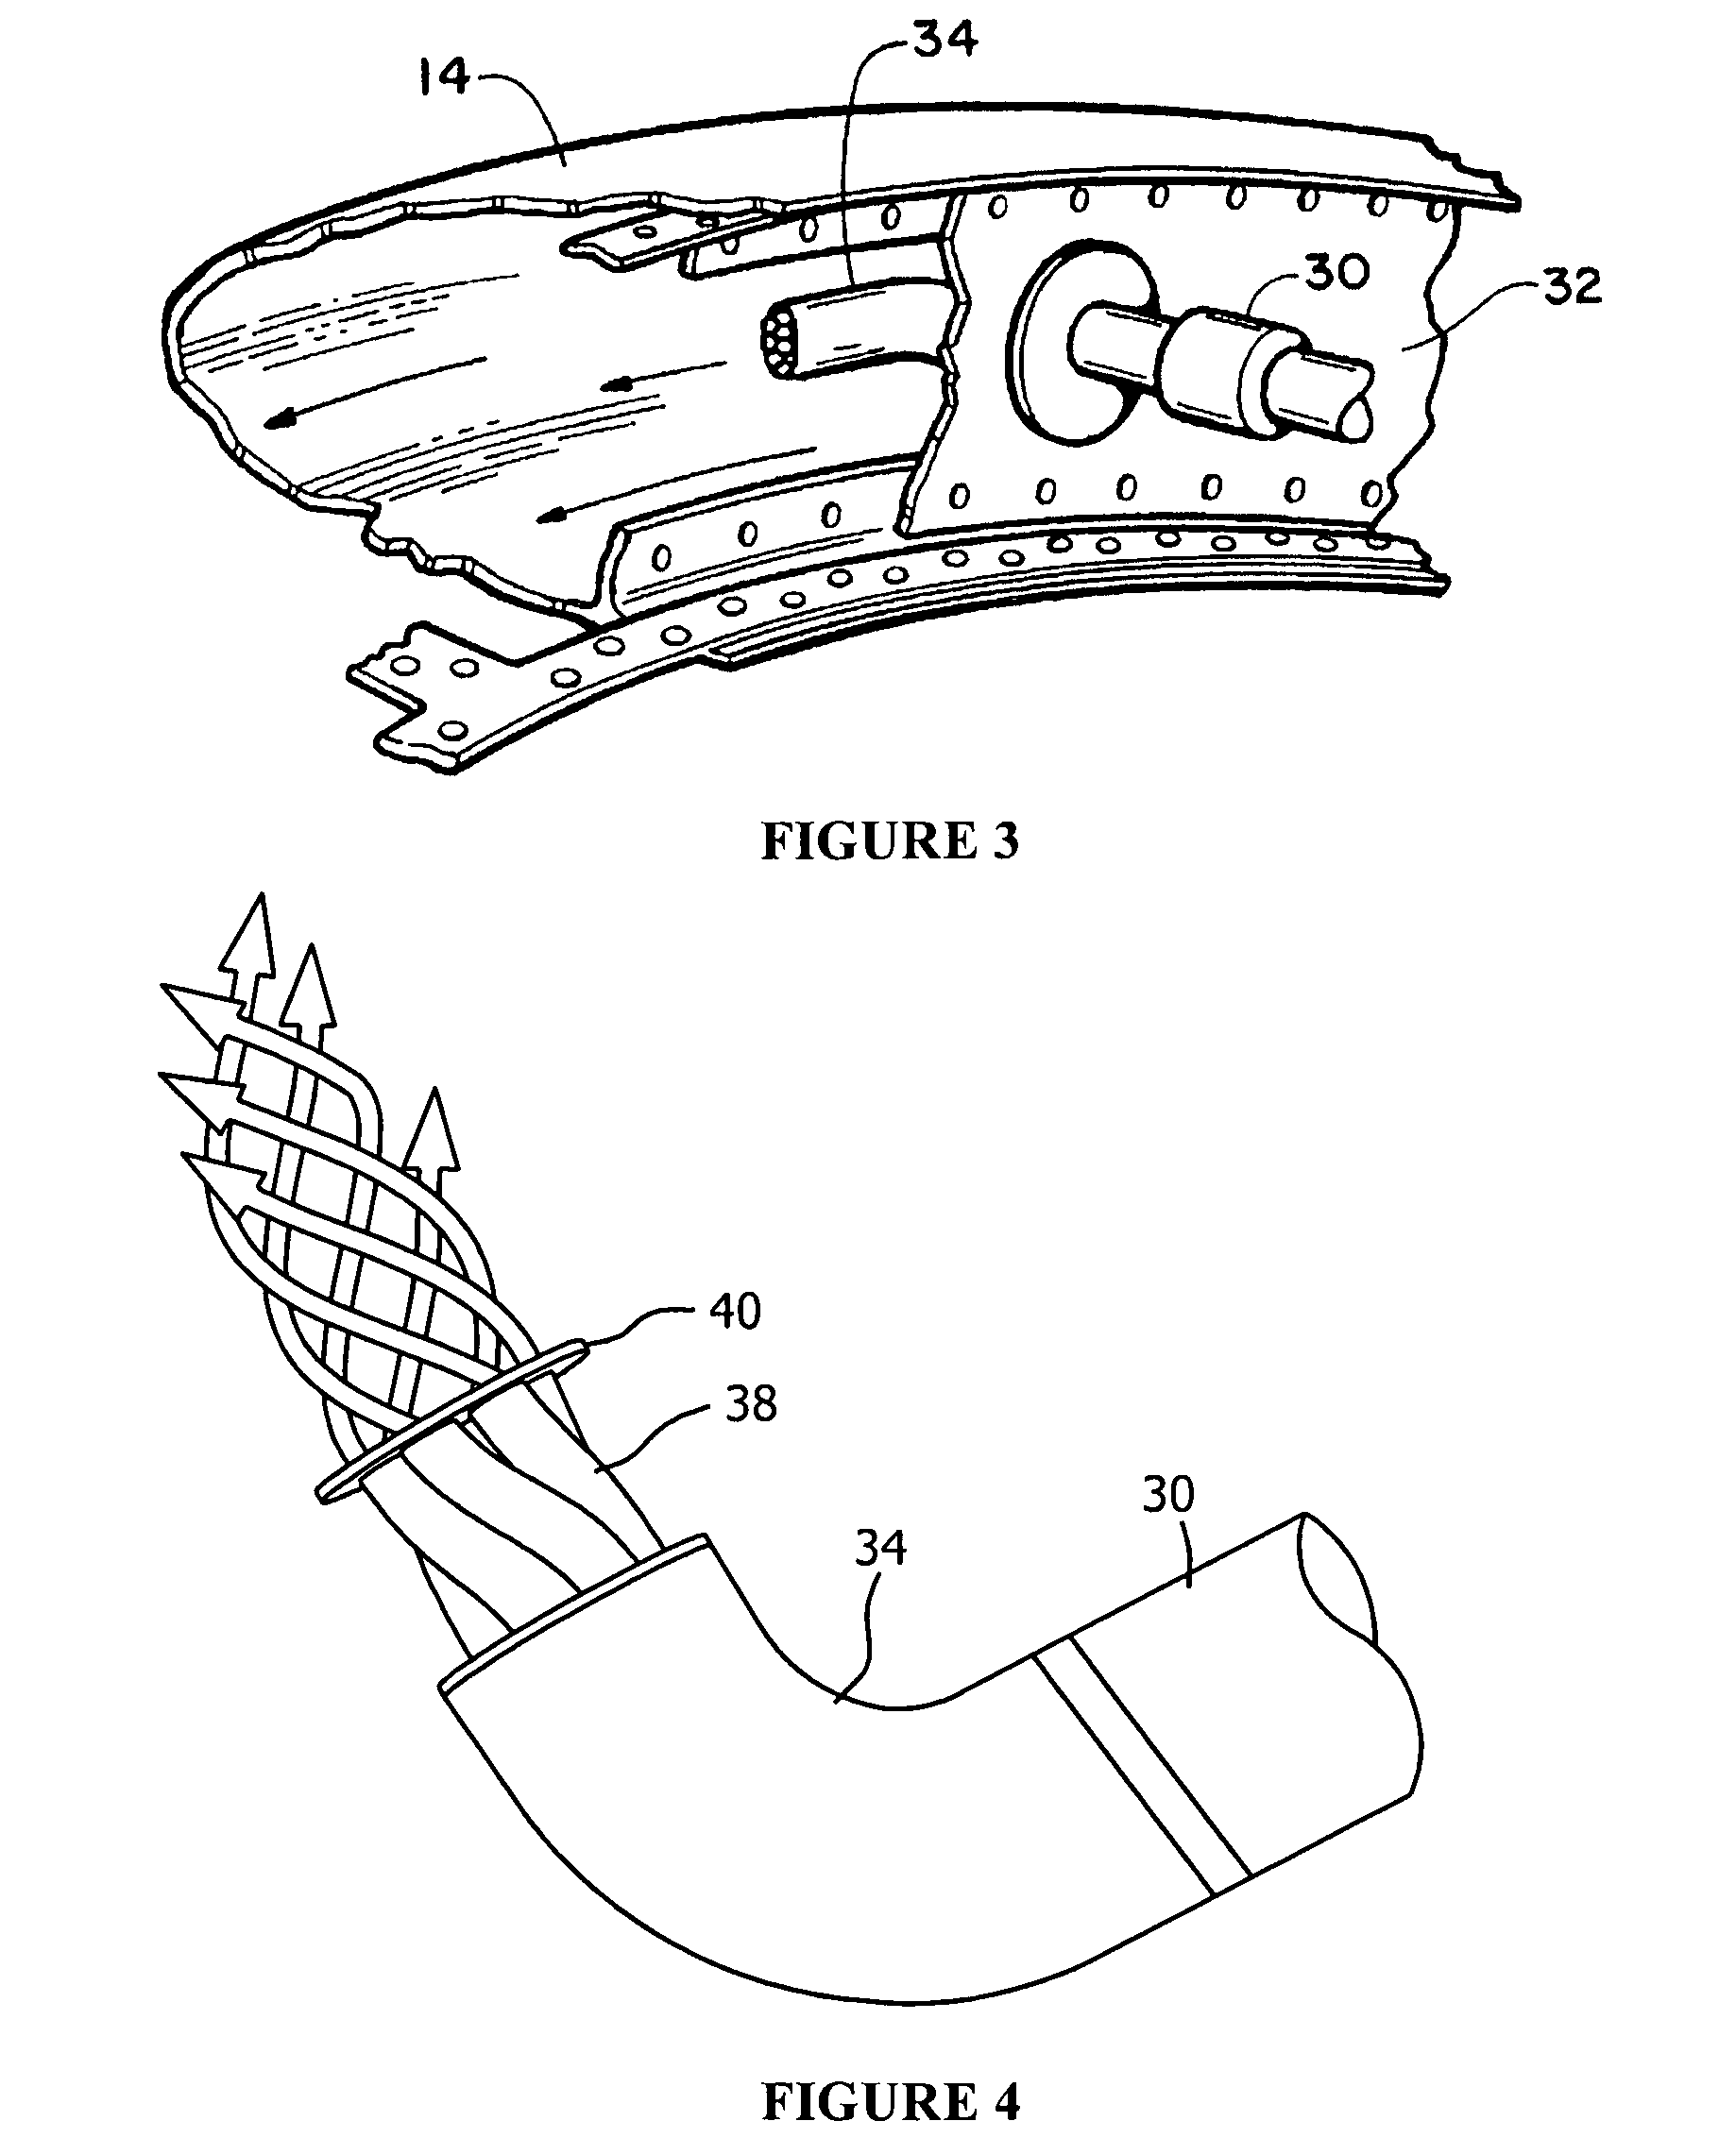 Method and apparatus for aircraft anti-icing